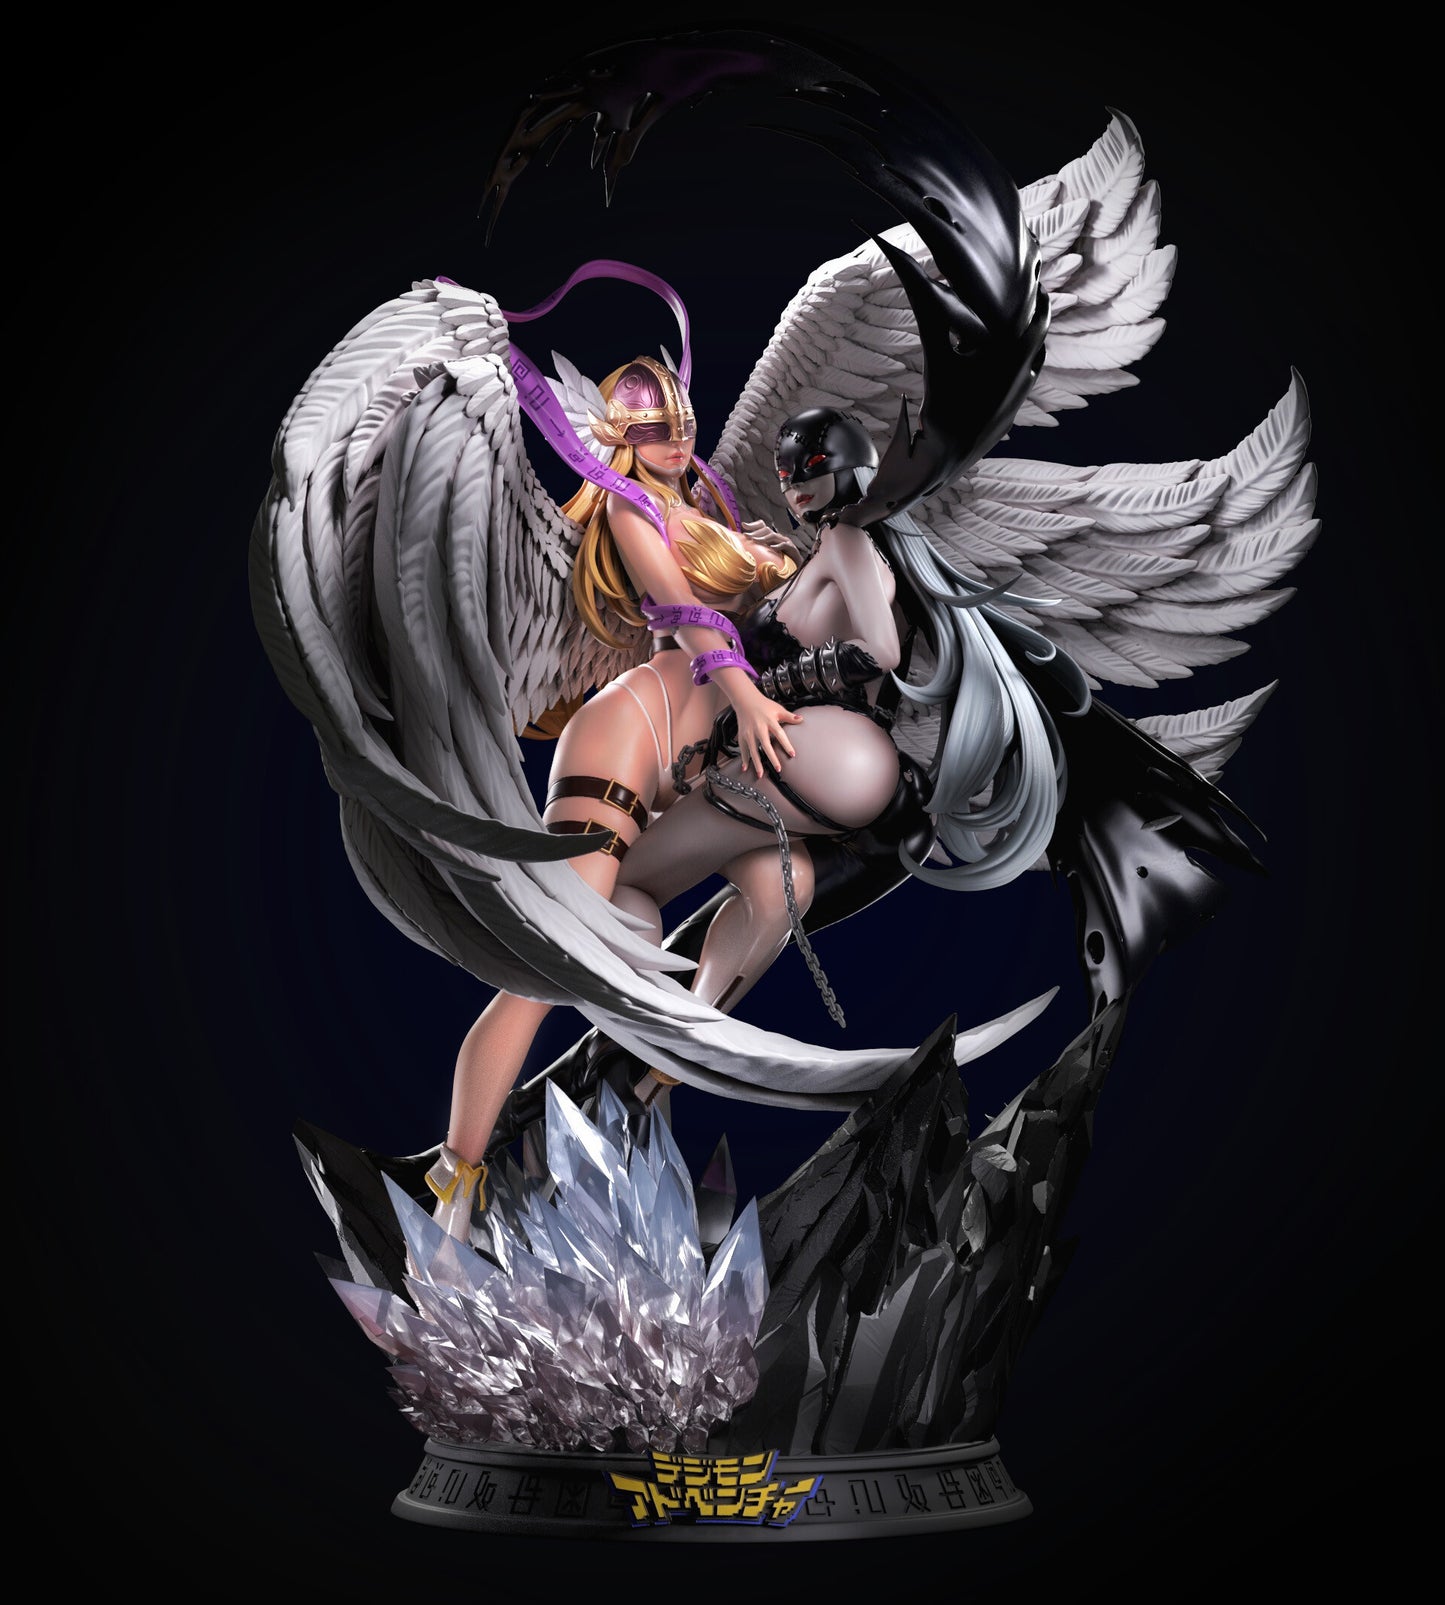 1988 Angewomon and Ladydevimon NSFW - Digimon - STL 3D Print Files